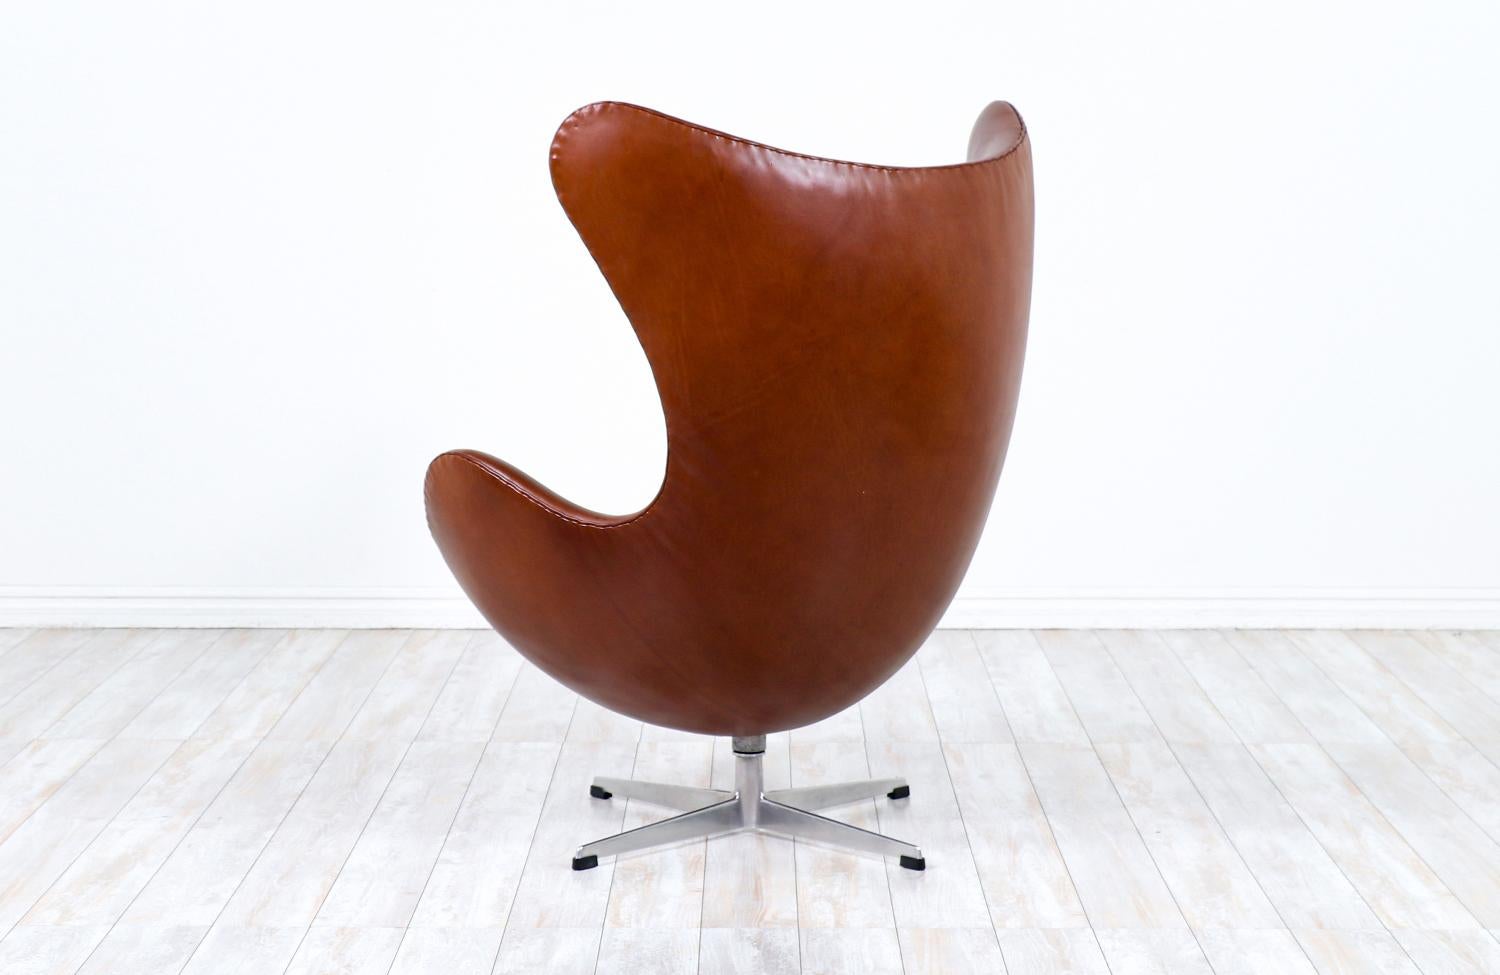 Mid-20th Century Expertly Restored - Danish Modern Cognac Leather “Egg” Chair by Arne Jacobsen For Sale